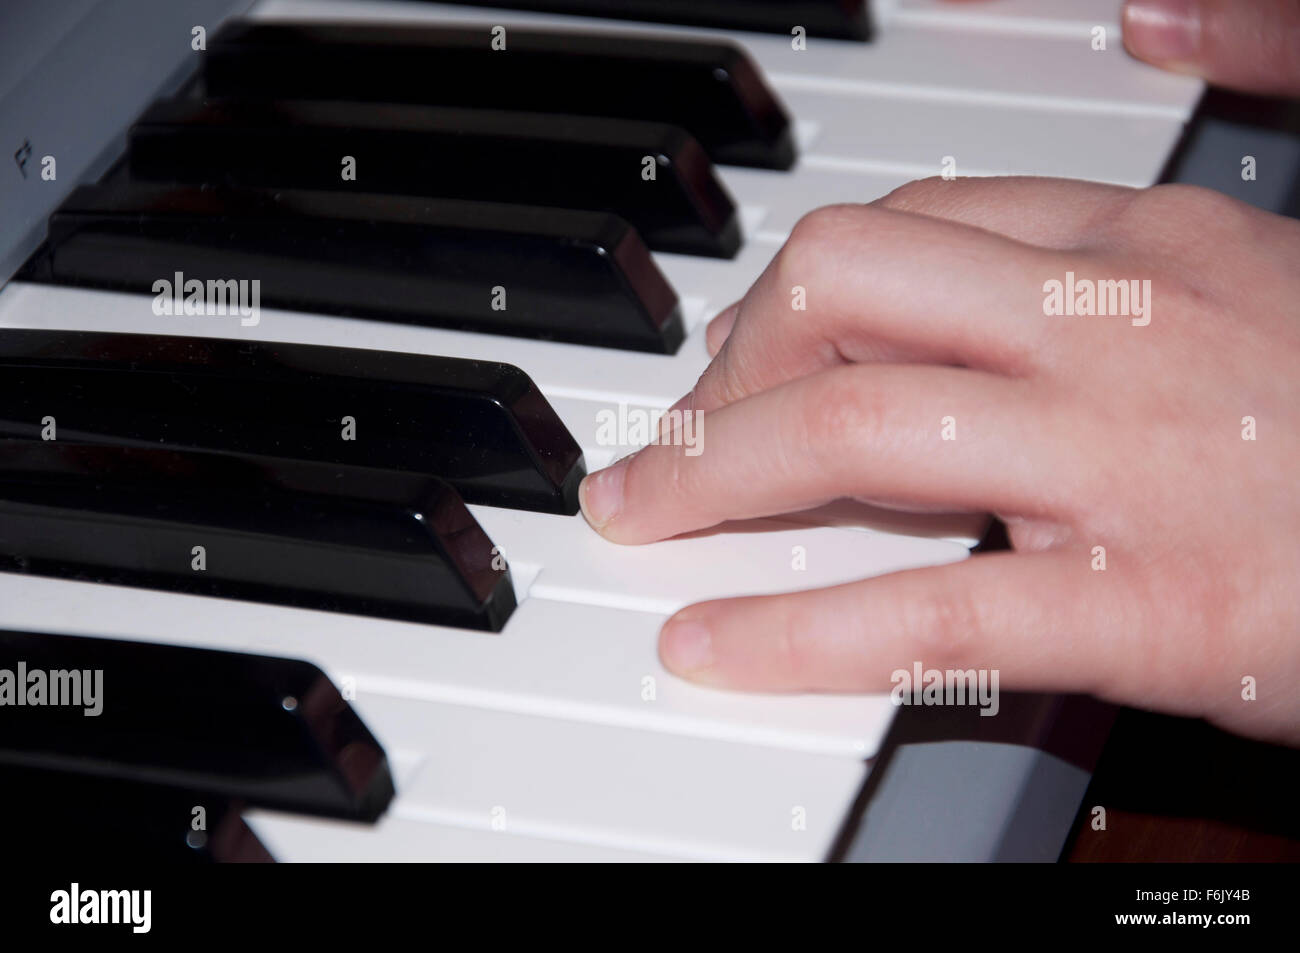 Hand over the piano keyboard playing music Stock Photo